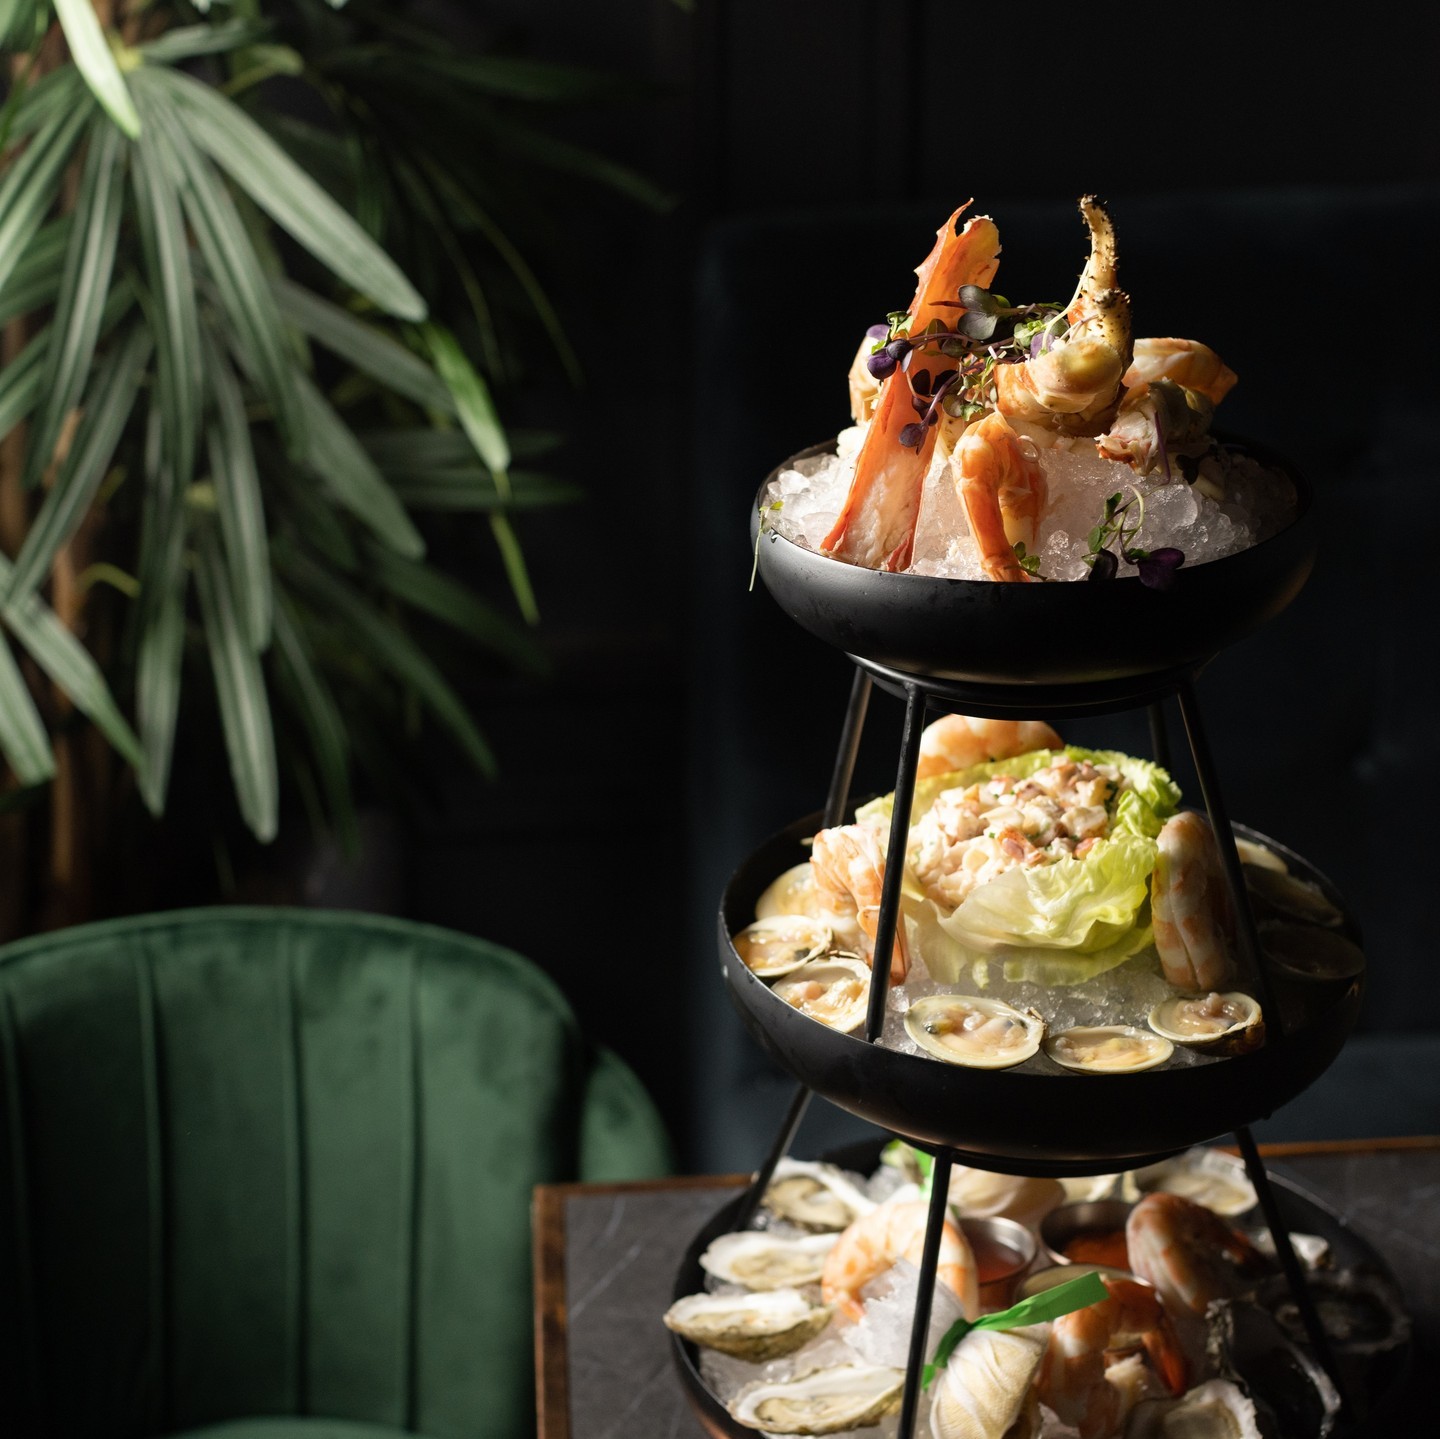 Like the view, the Seafood Tower gets better and better with every tier.